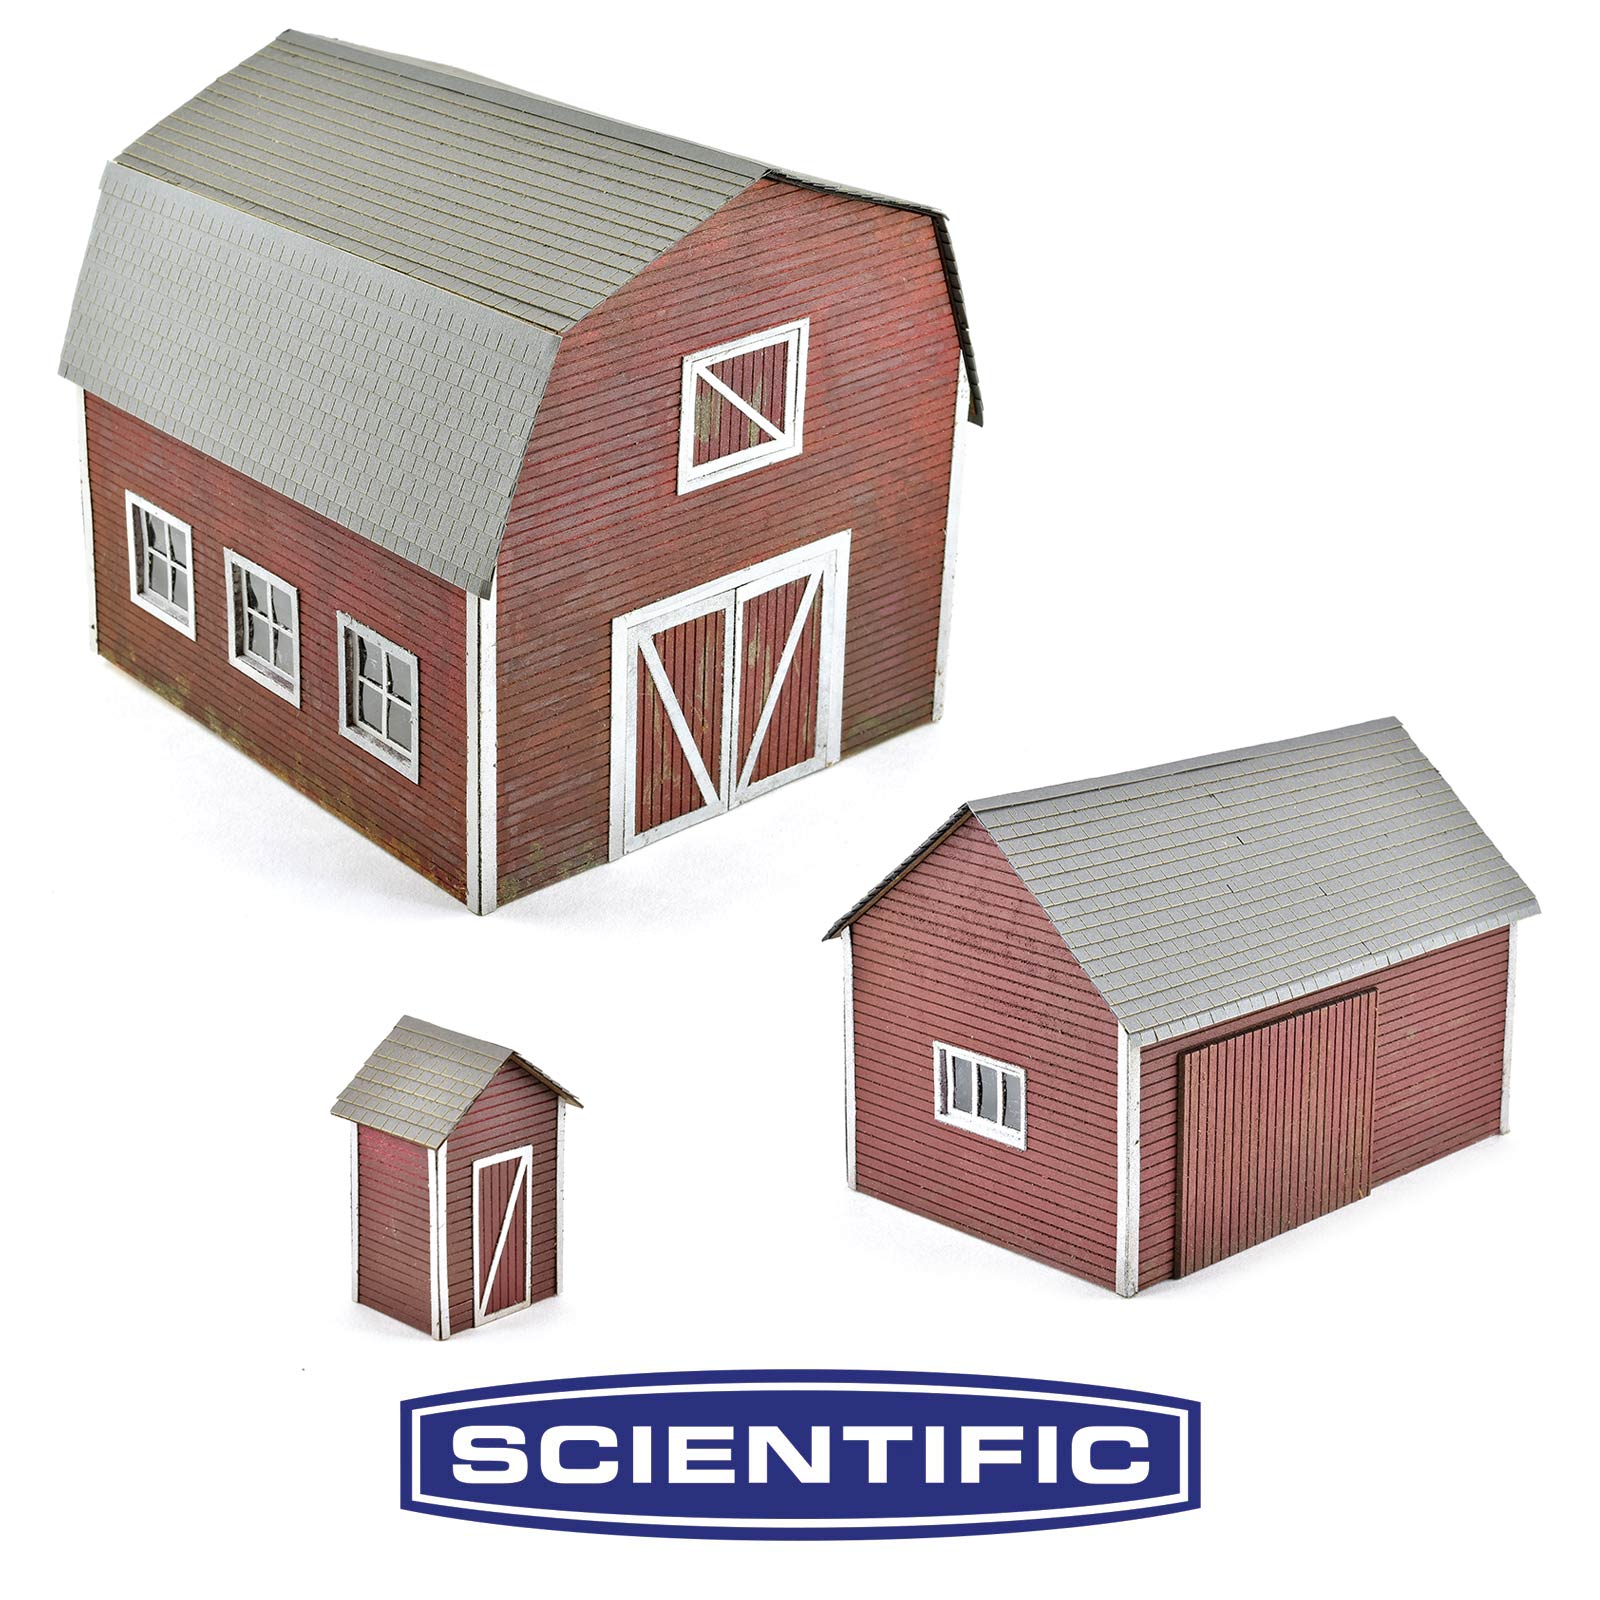 Rural Farm Structures, Deluxe Set of 3 Kits, O Scale, By Scientific - Micro - Mark Scale Model Kits